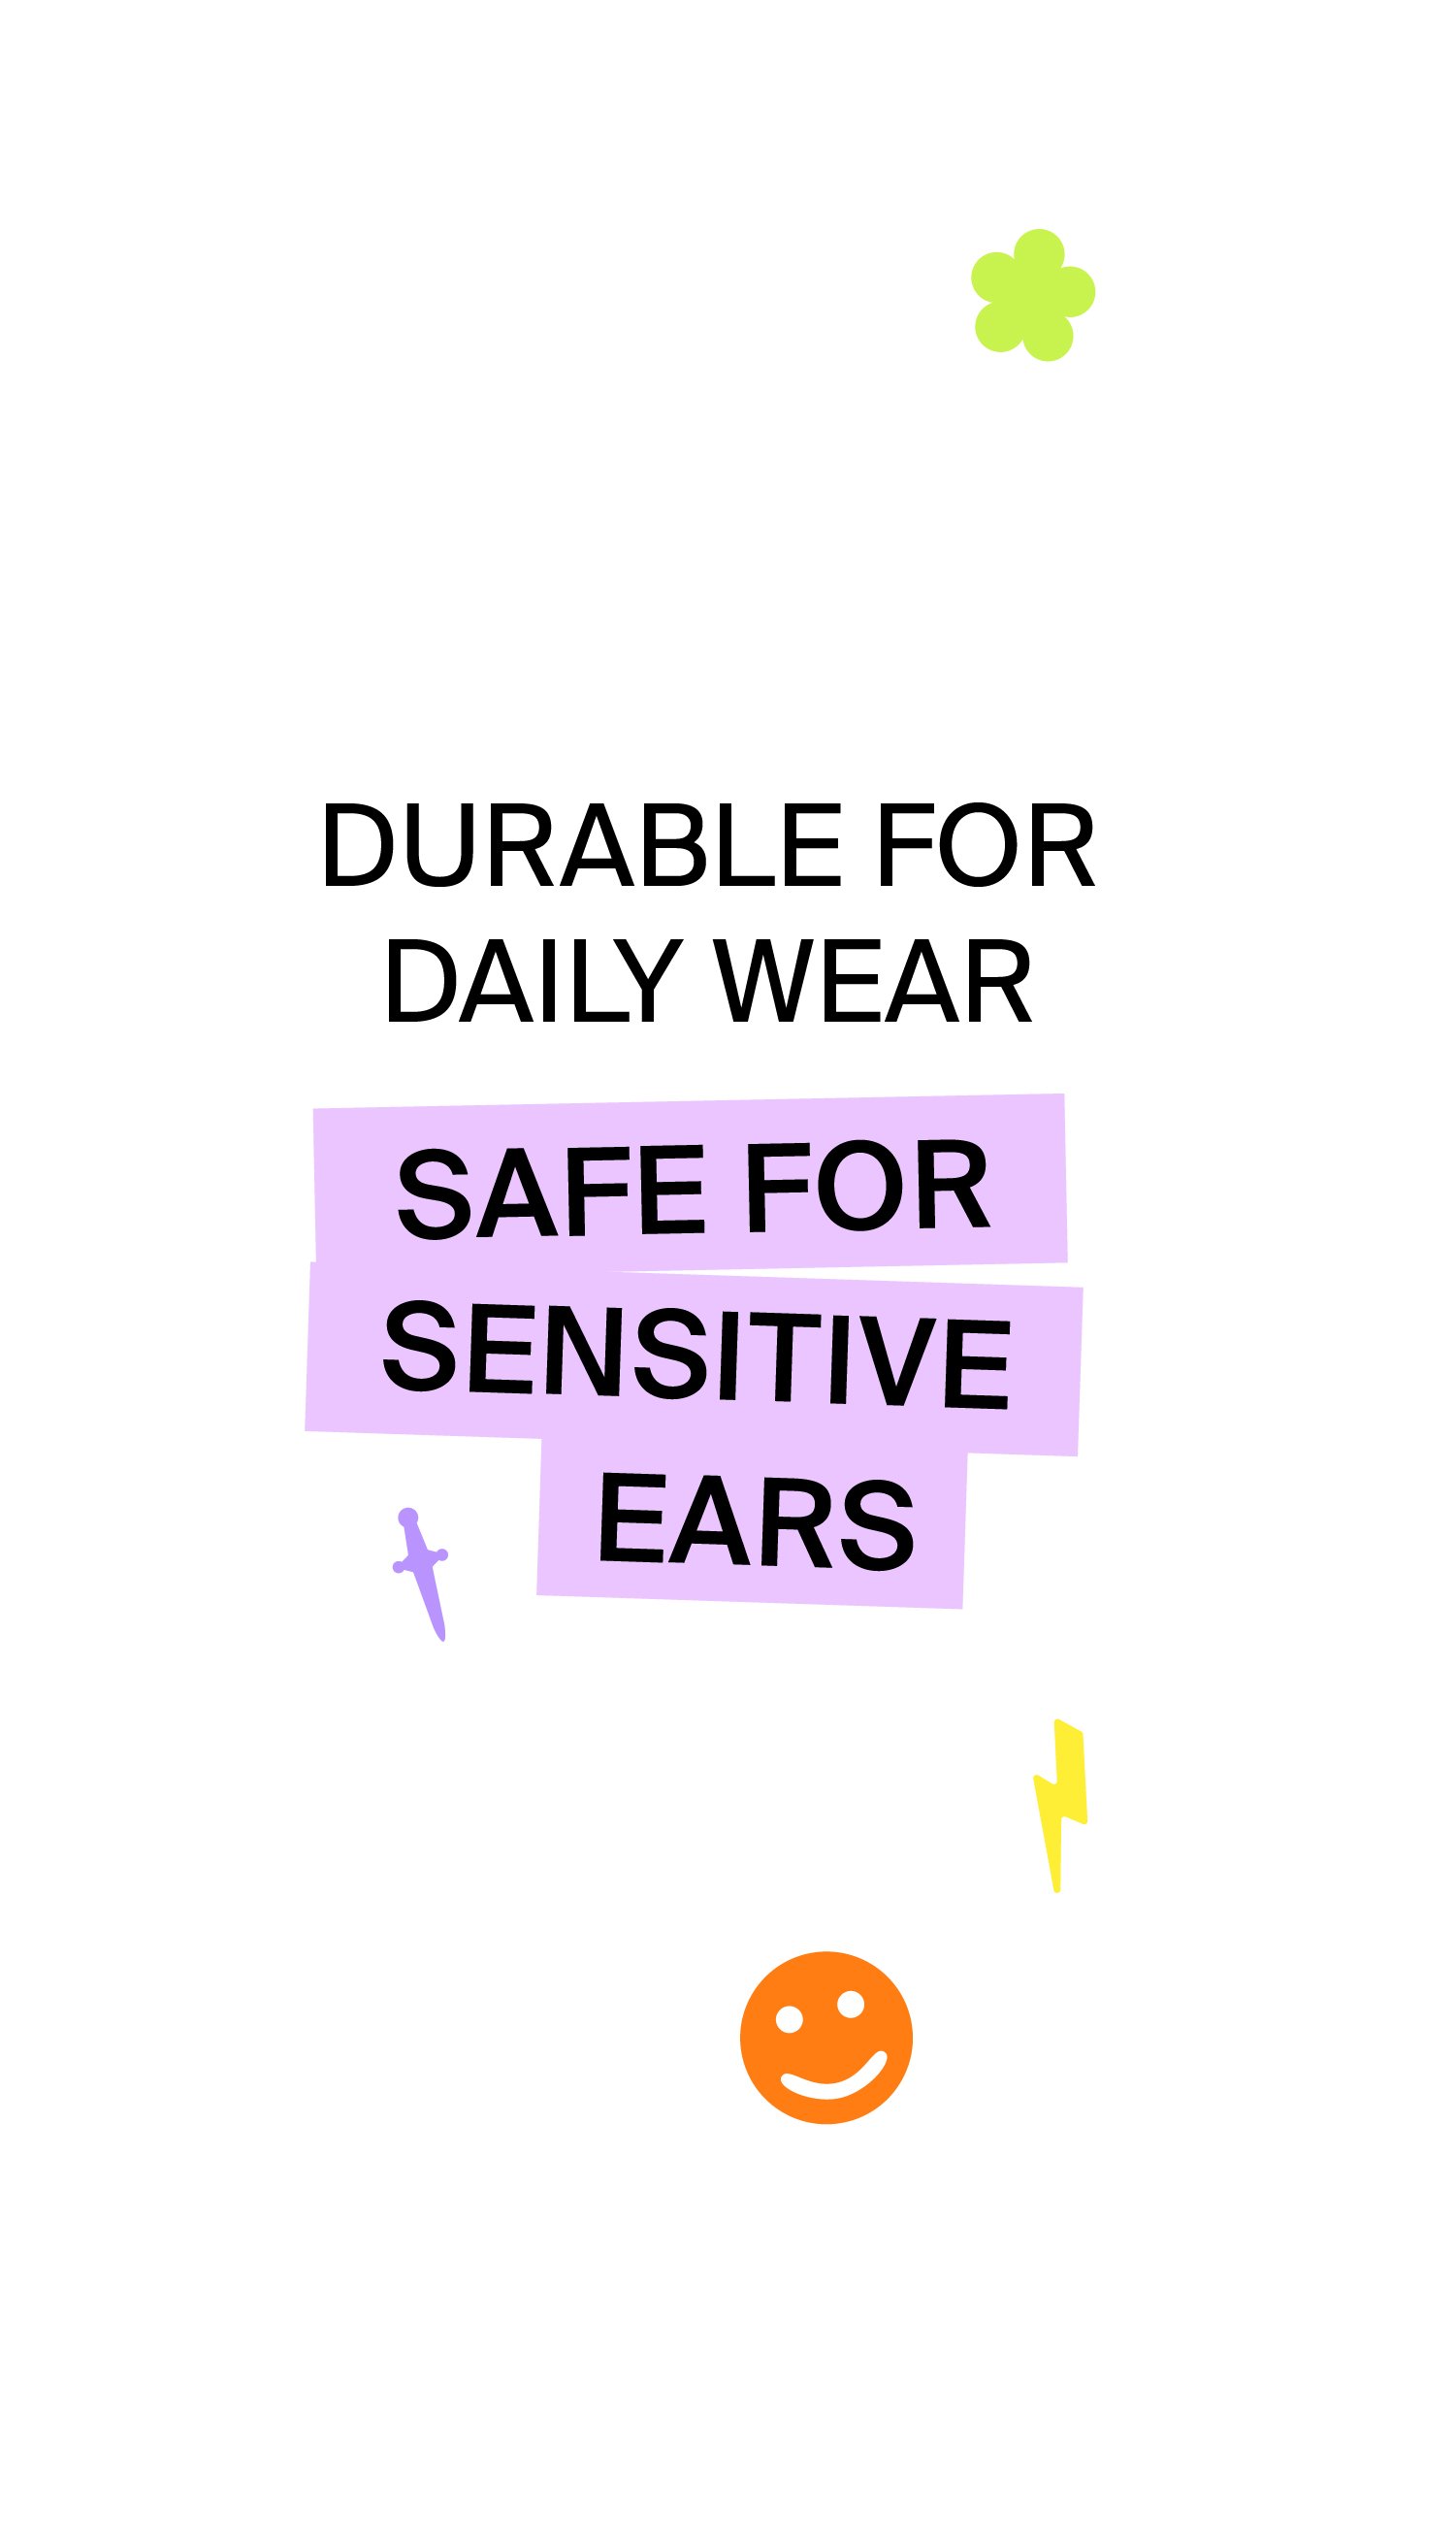 DURABLE FOR DAILY WEAR, SAFE FOR SENSITIVE EARS